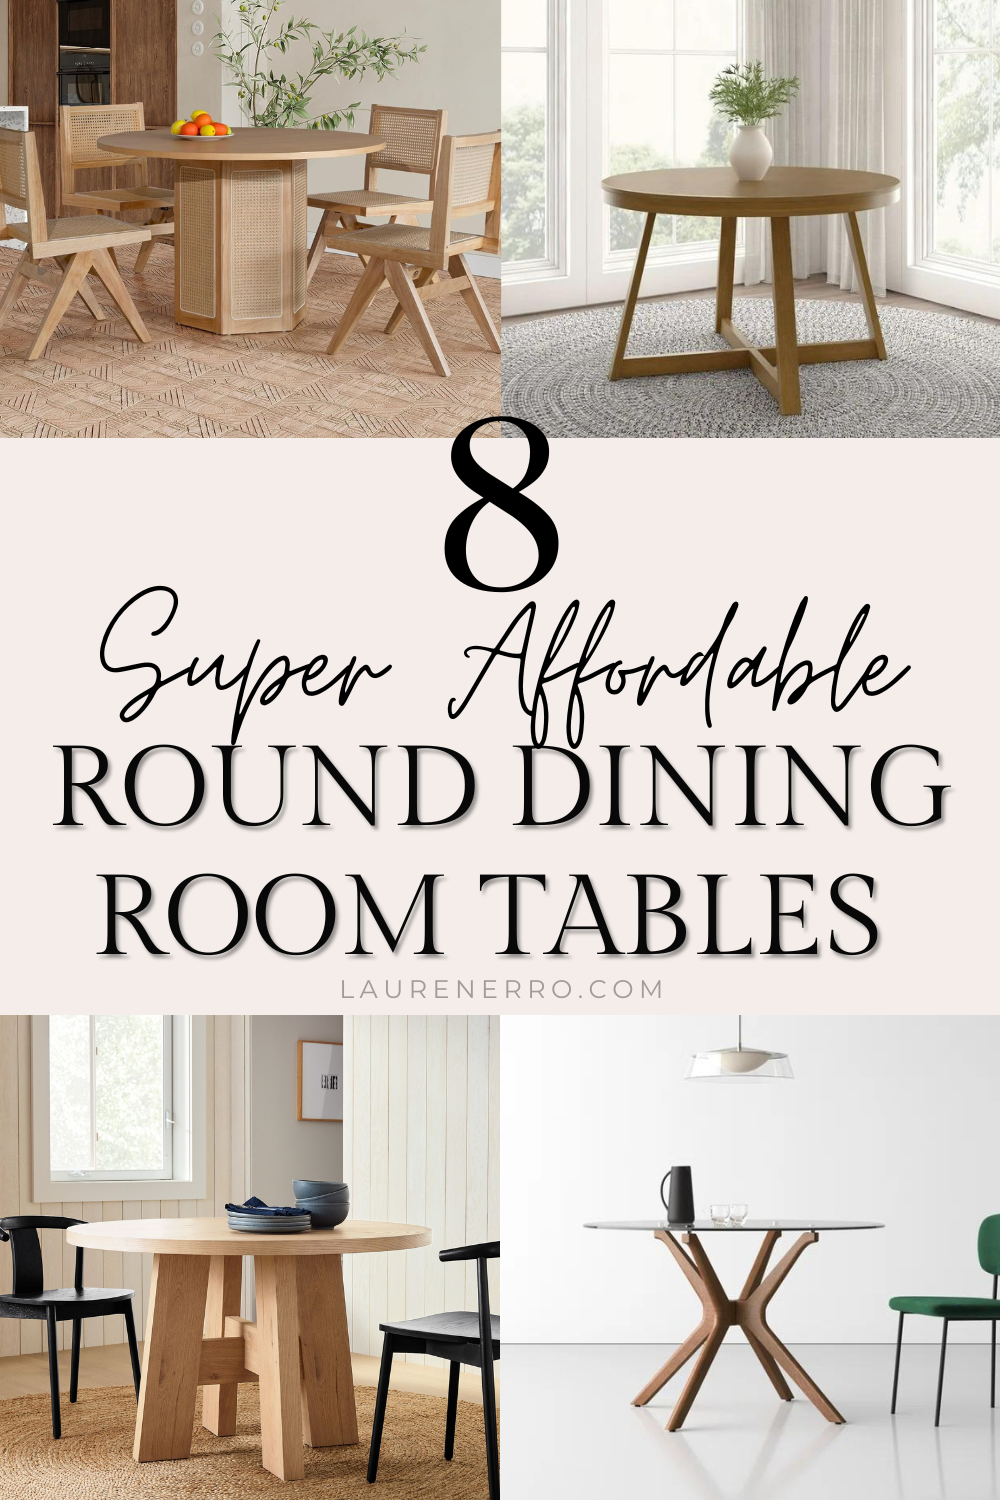 Amazing Round Dining Room Tables for Under $1000